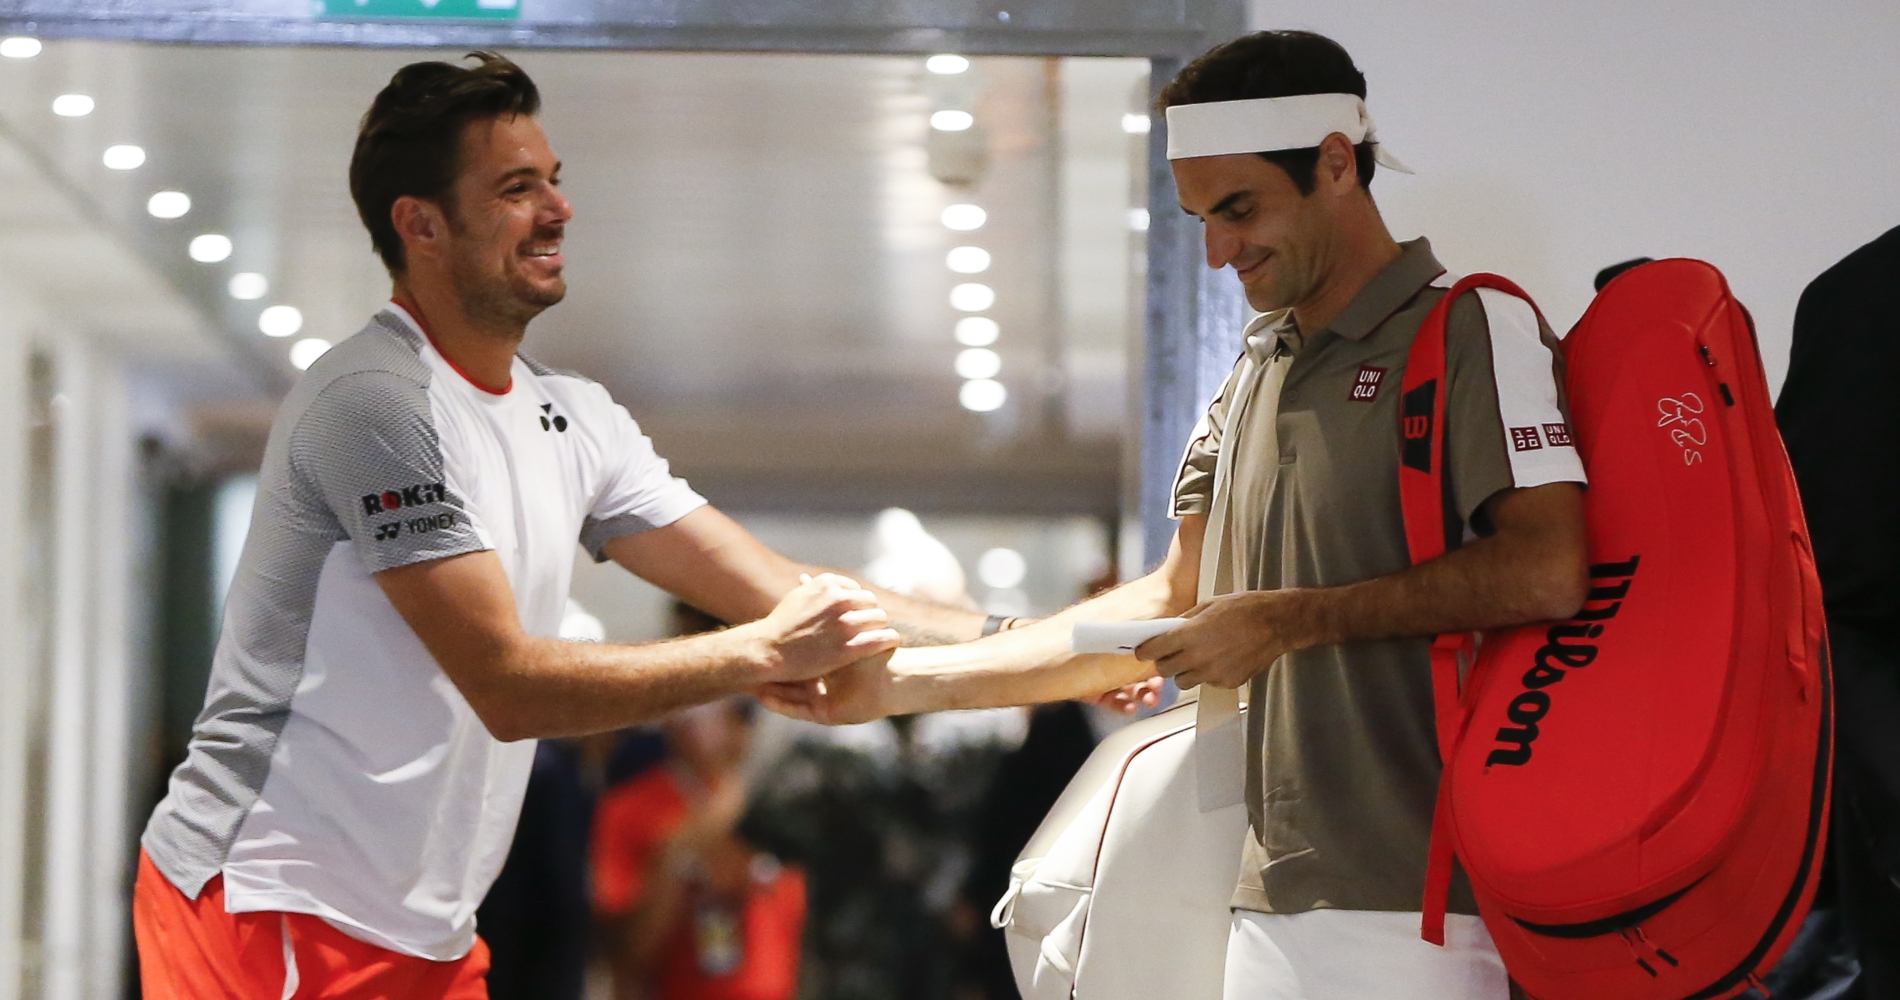 Stan Wawrinka and Roger Federer before their quarter-final encounter during the 2019 French Open